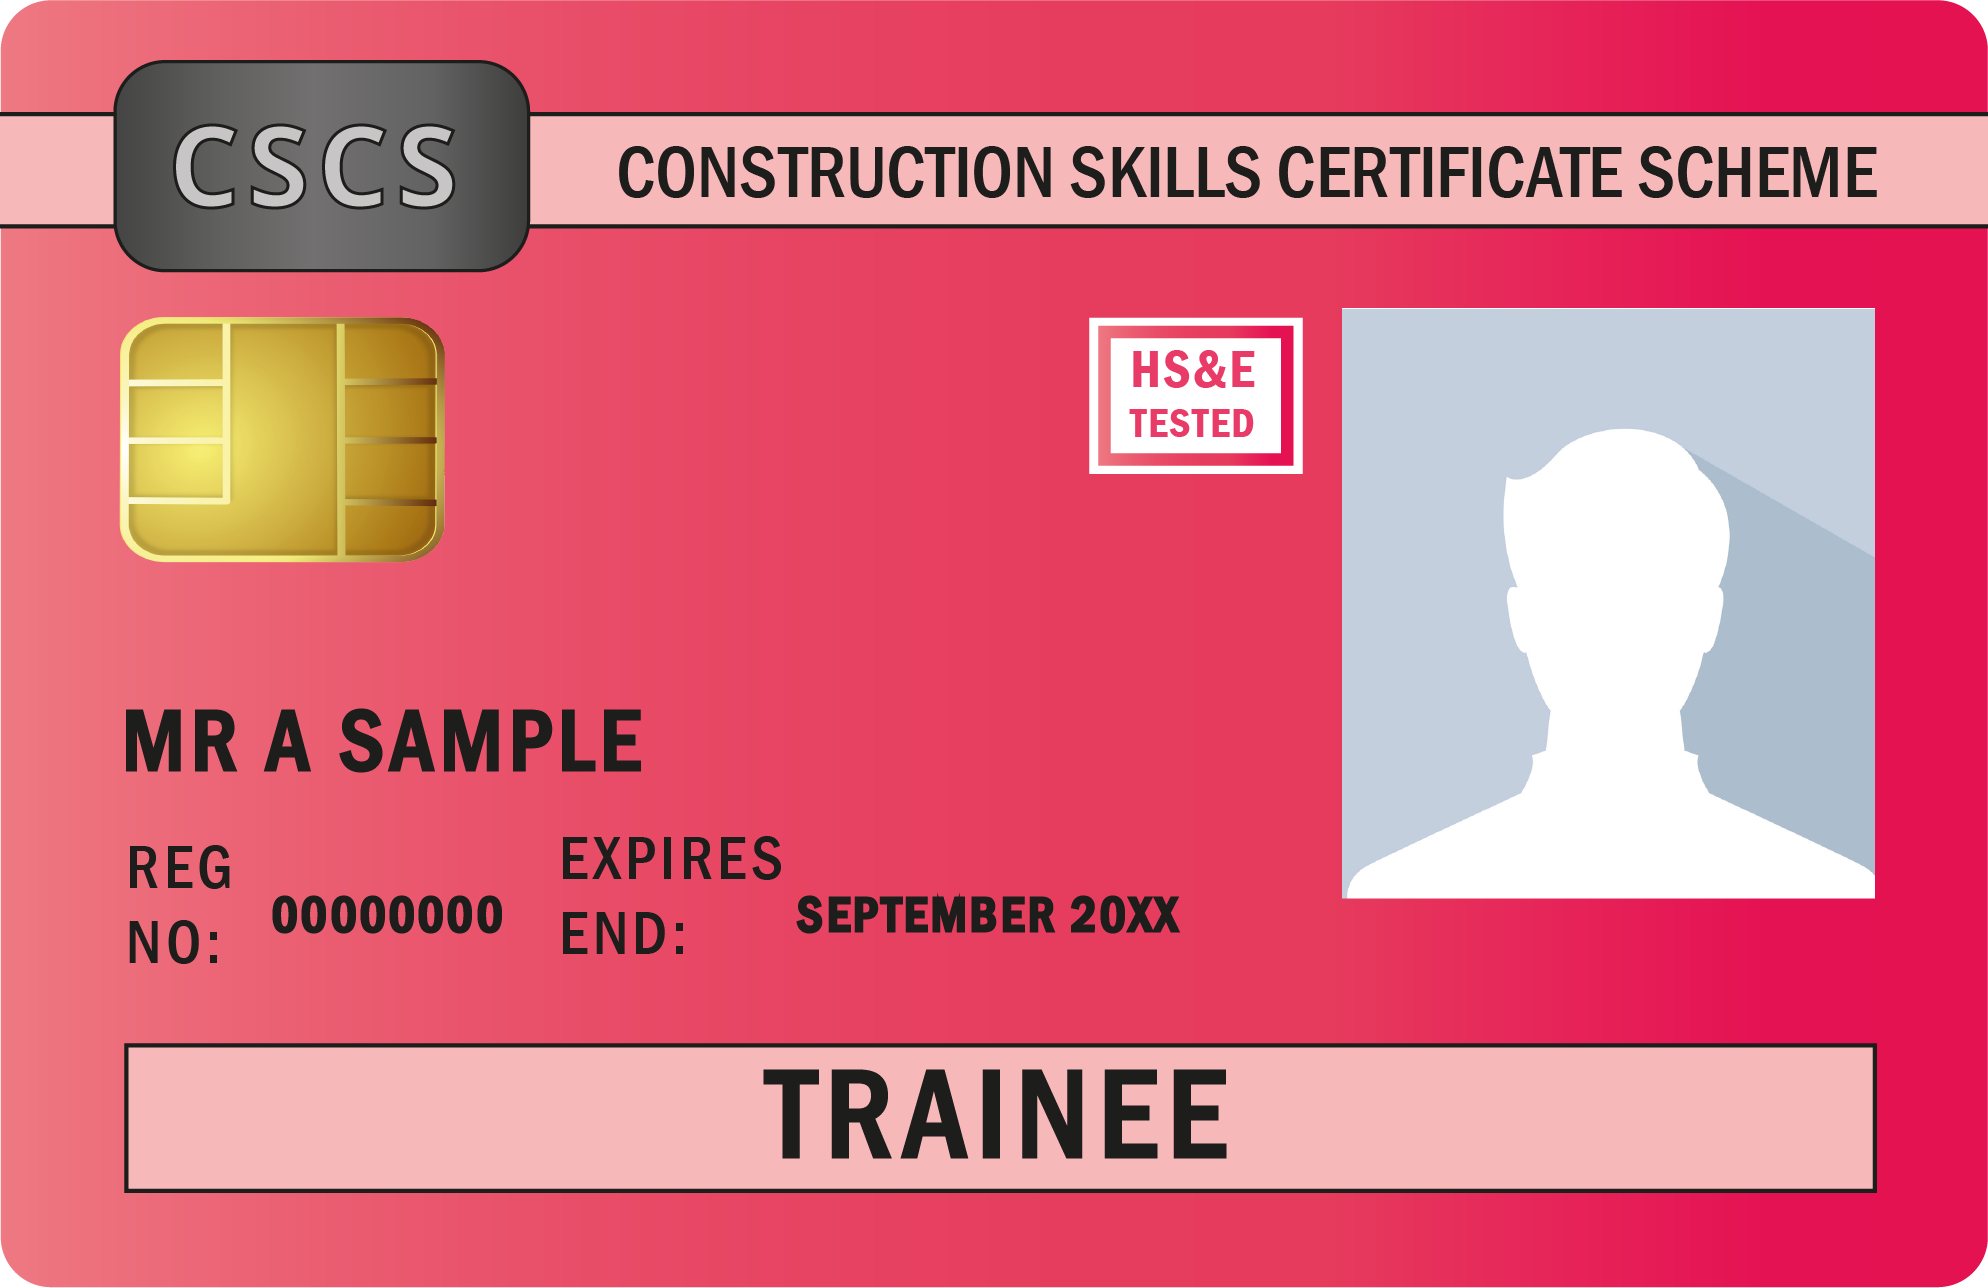 Image shows Trainee Red Card